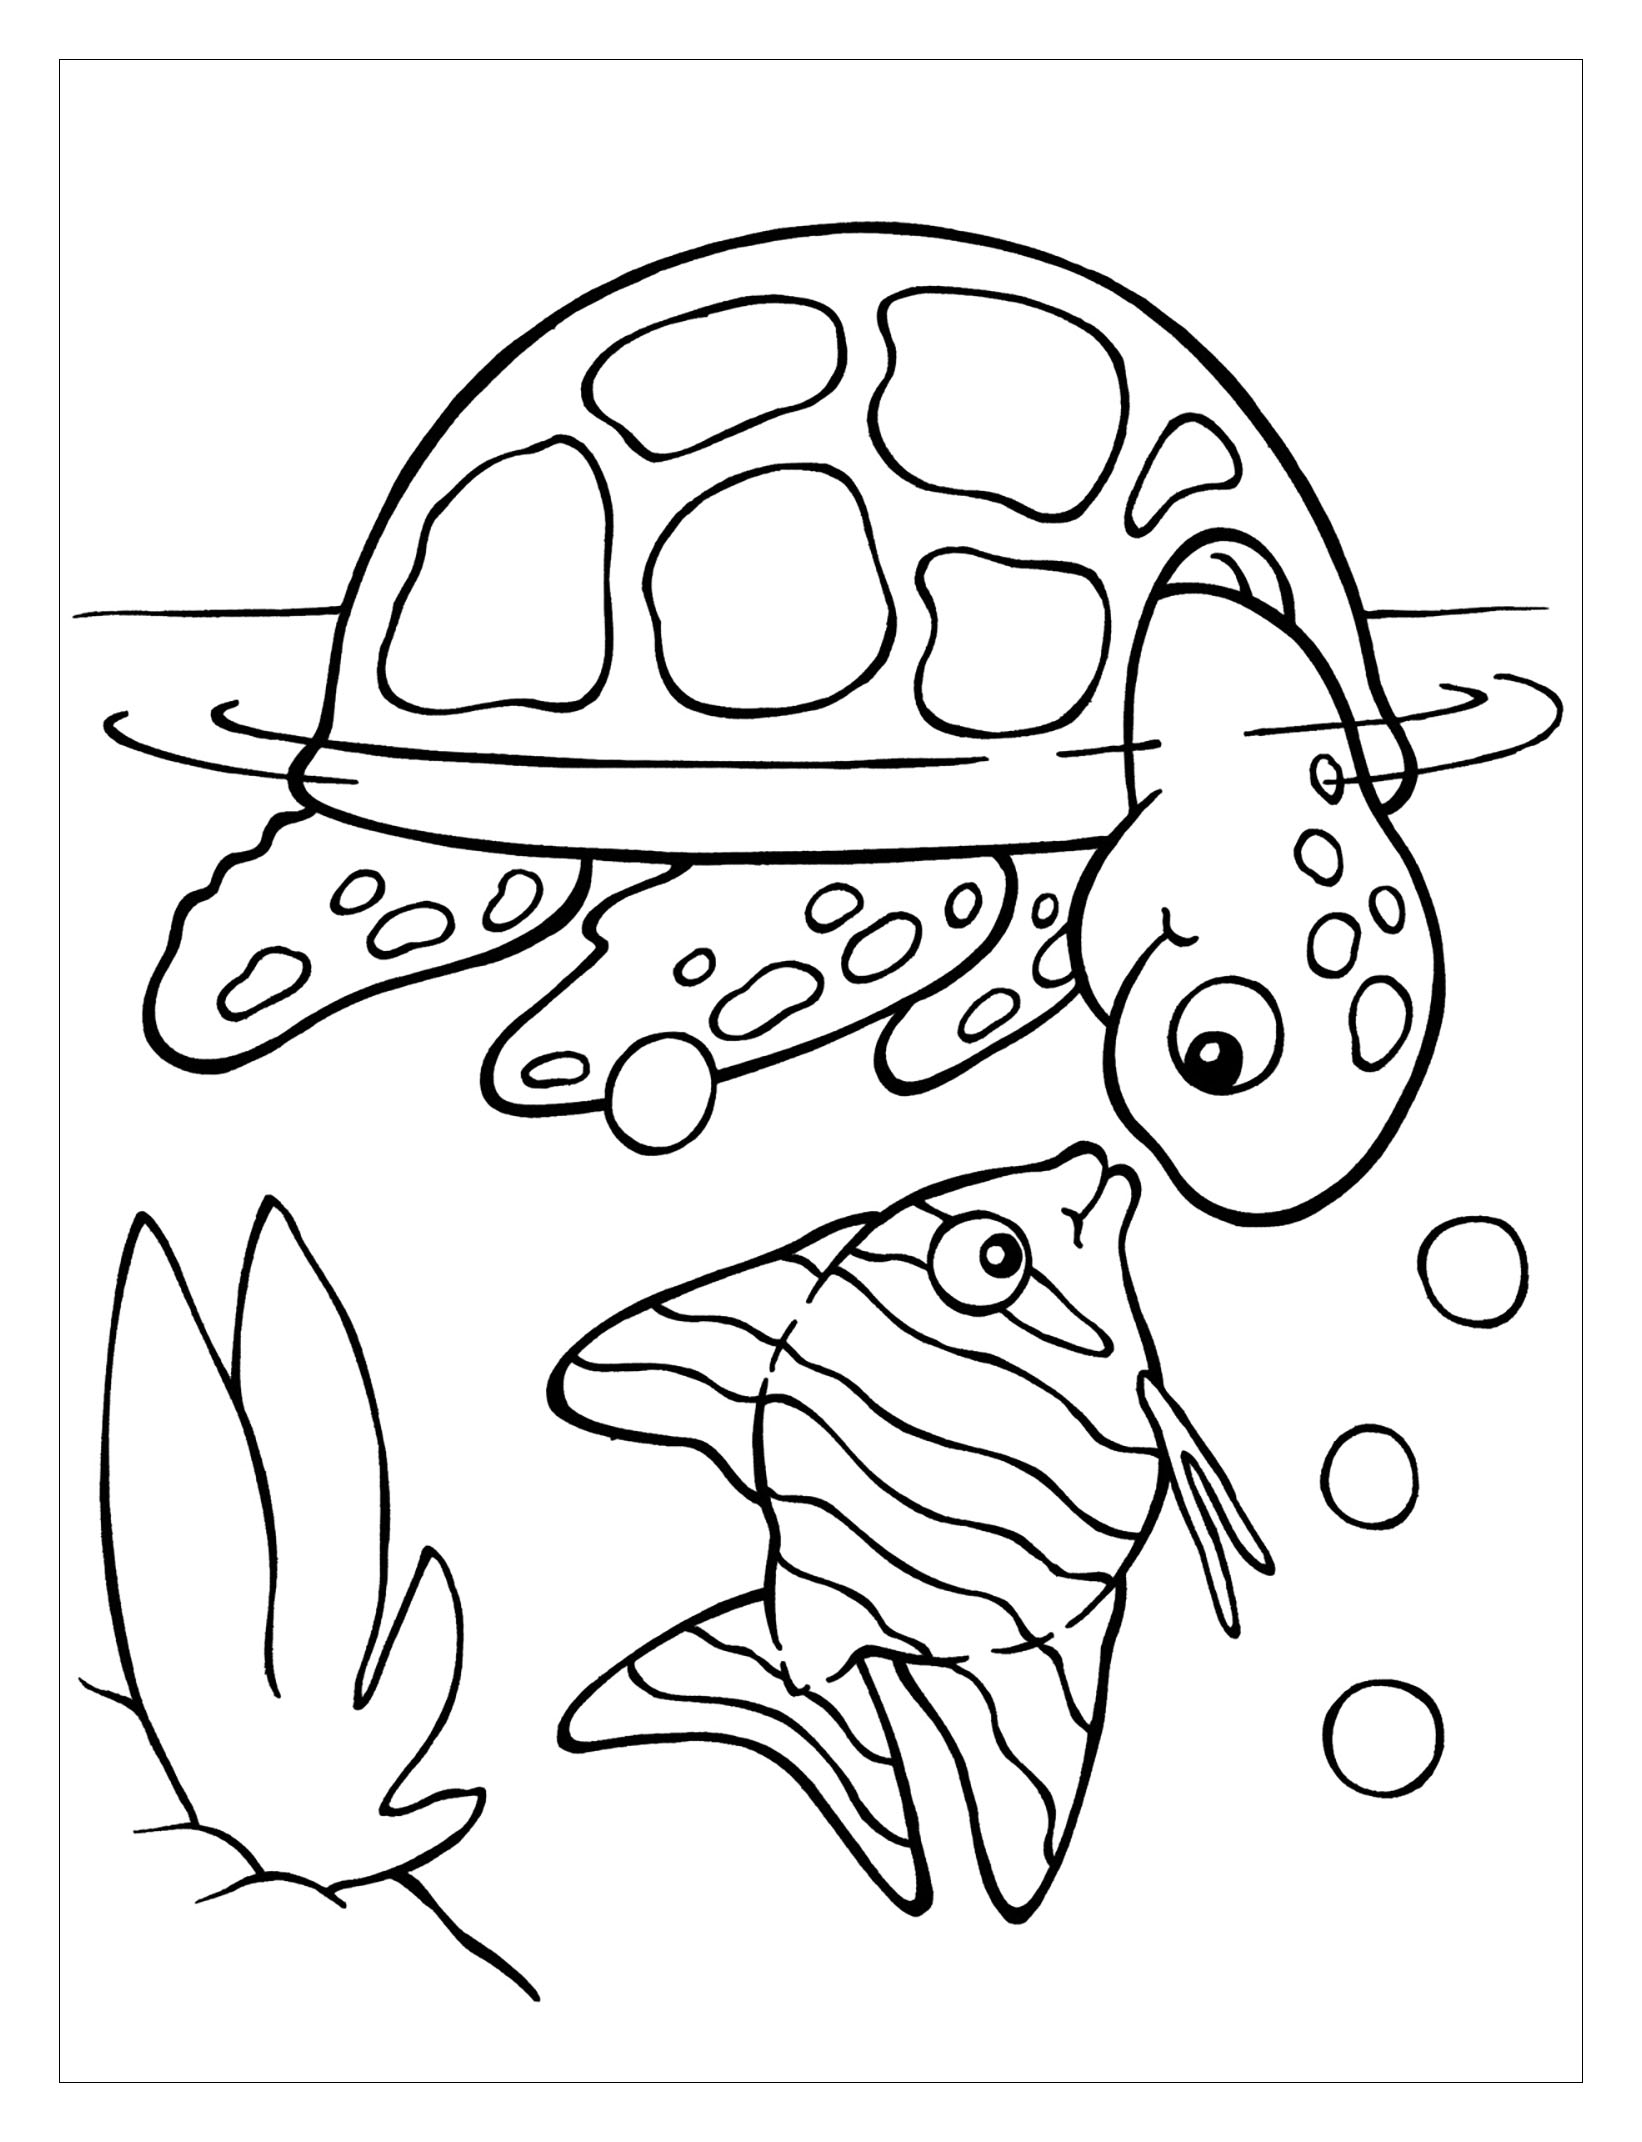 22-animal-coloring-pages-for-adults-simple-png-colorist